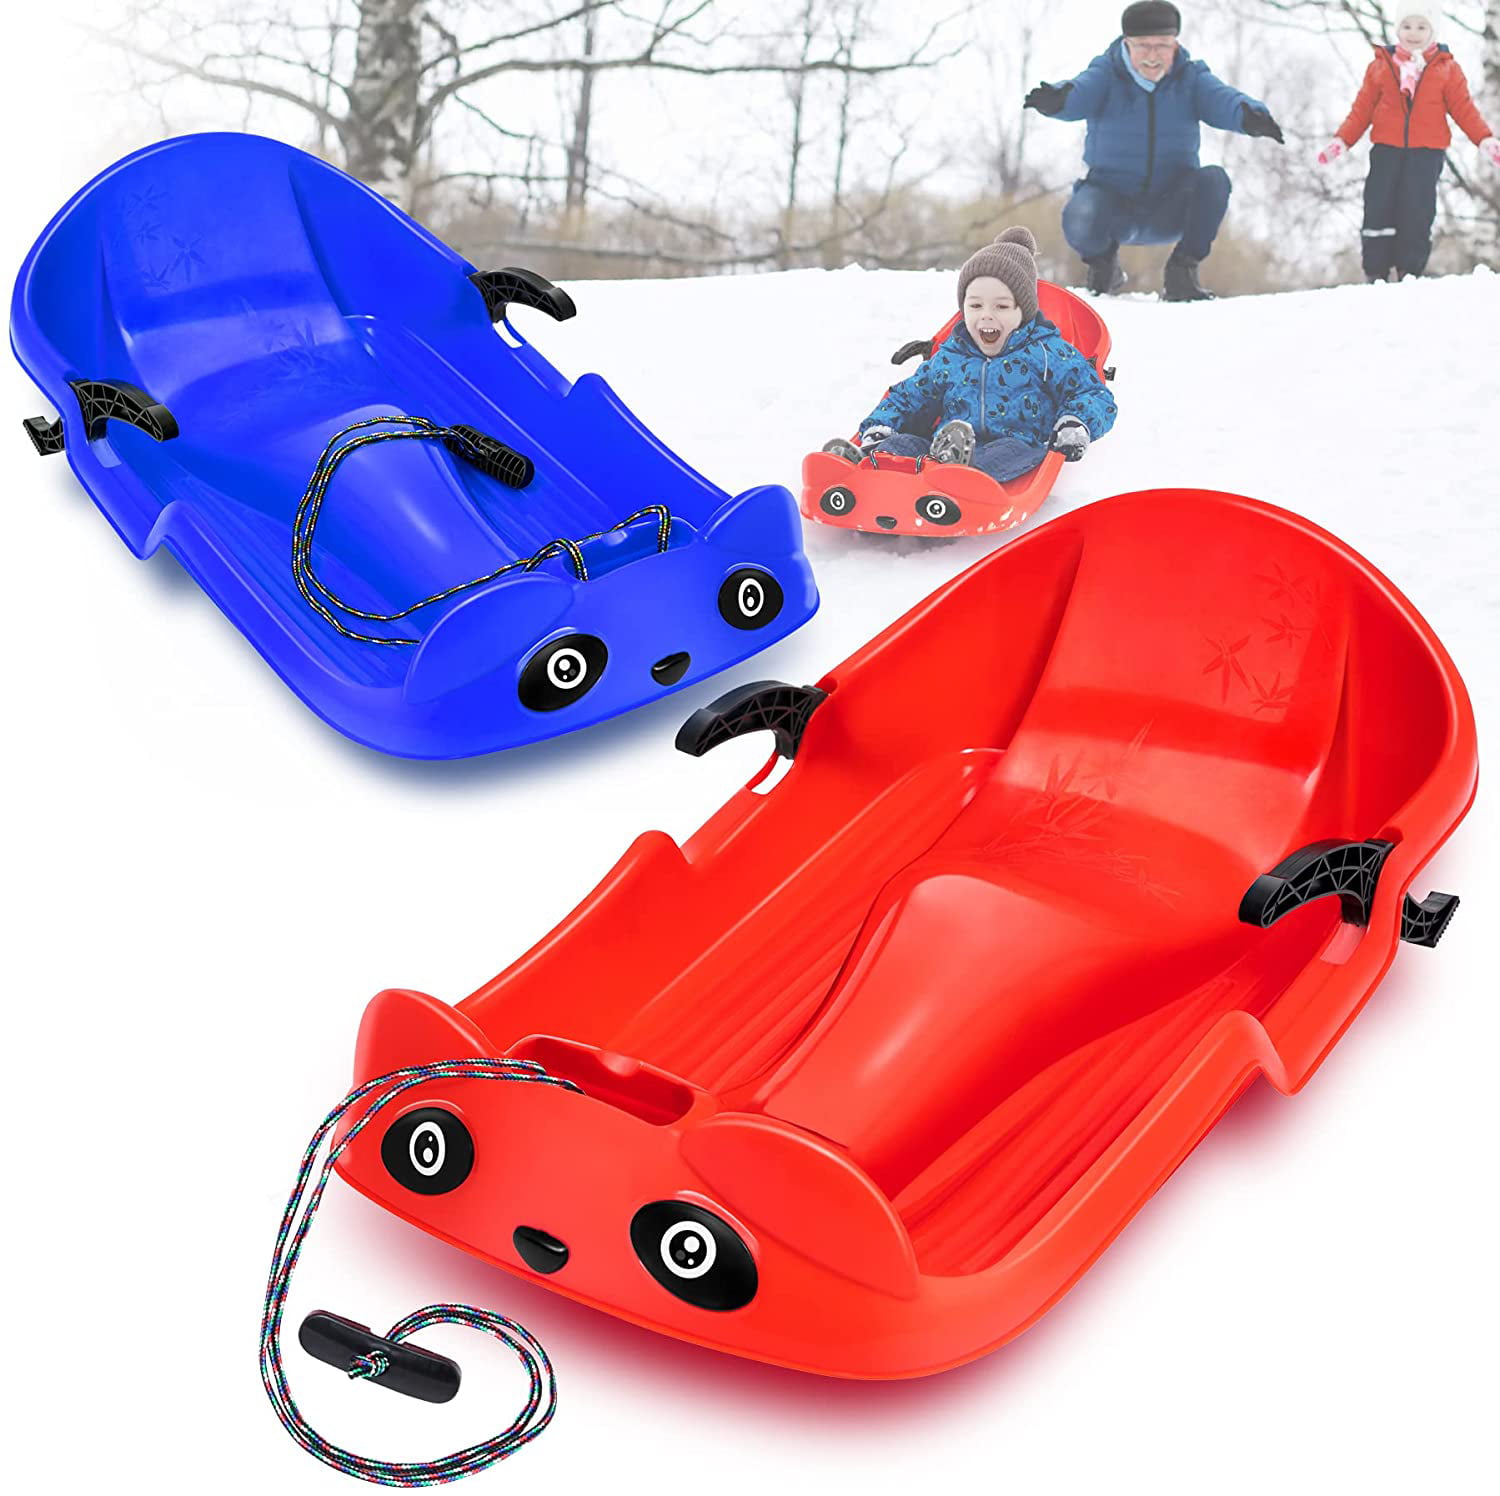 Outdoor Snow Sledge Thicken Anti-freeze Sports Skiing Pad Snowboard Winter Ski Sled Playing Snow Grass Sledge Sliding Board for Kids Adult Red 